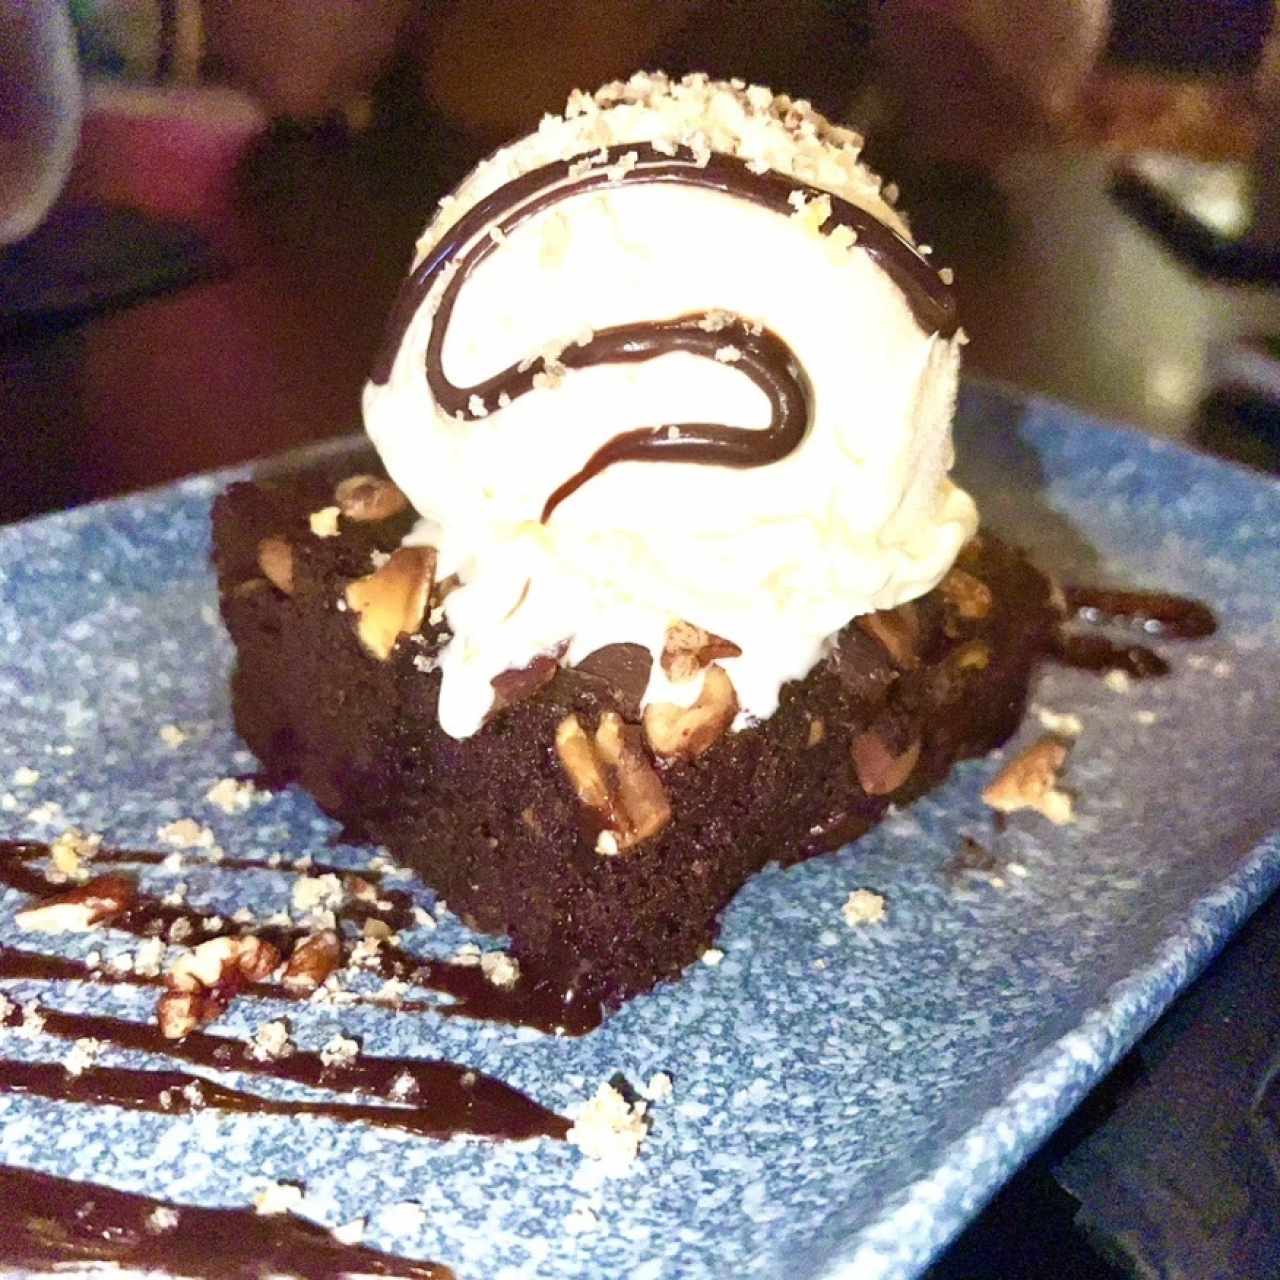 POSTRES - BROWNIE HELLO DOLLY